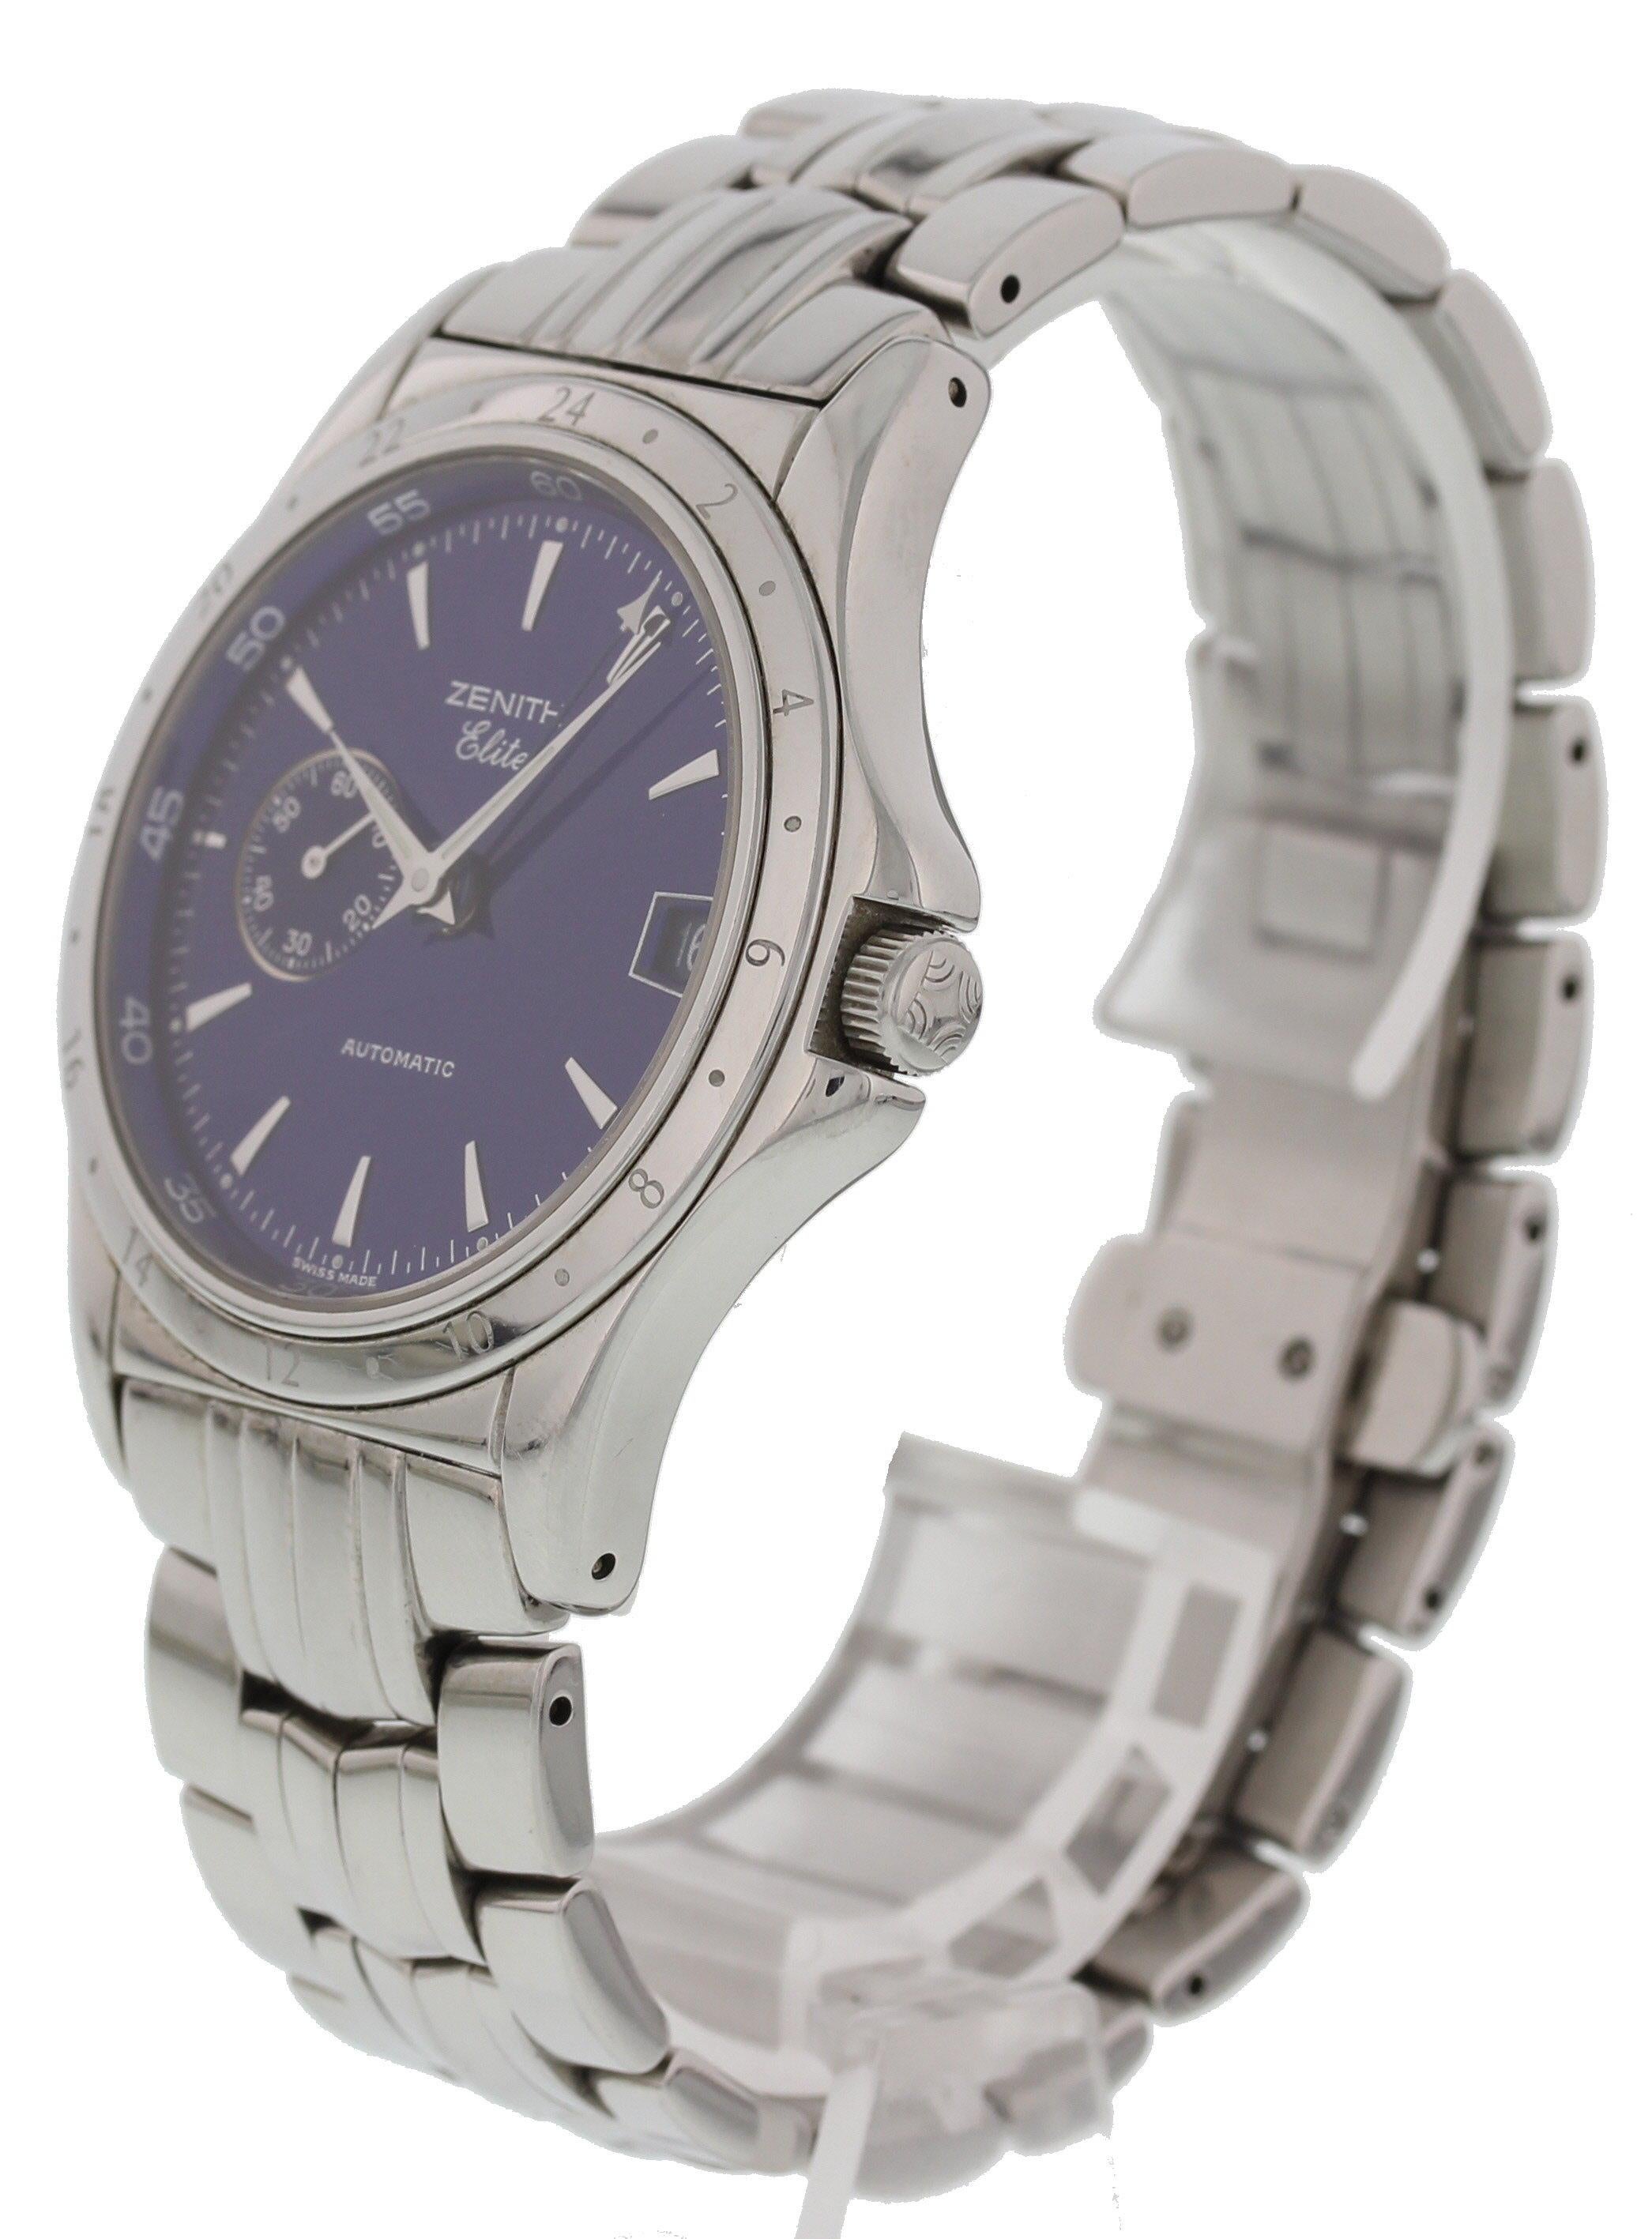 Men's Zentth Elite Automatic In Excellent Condition For Sale In New York, NY